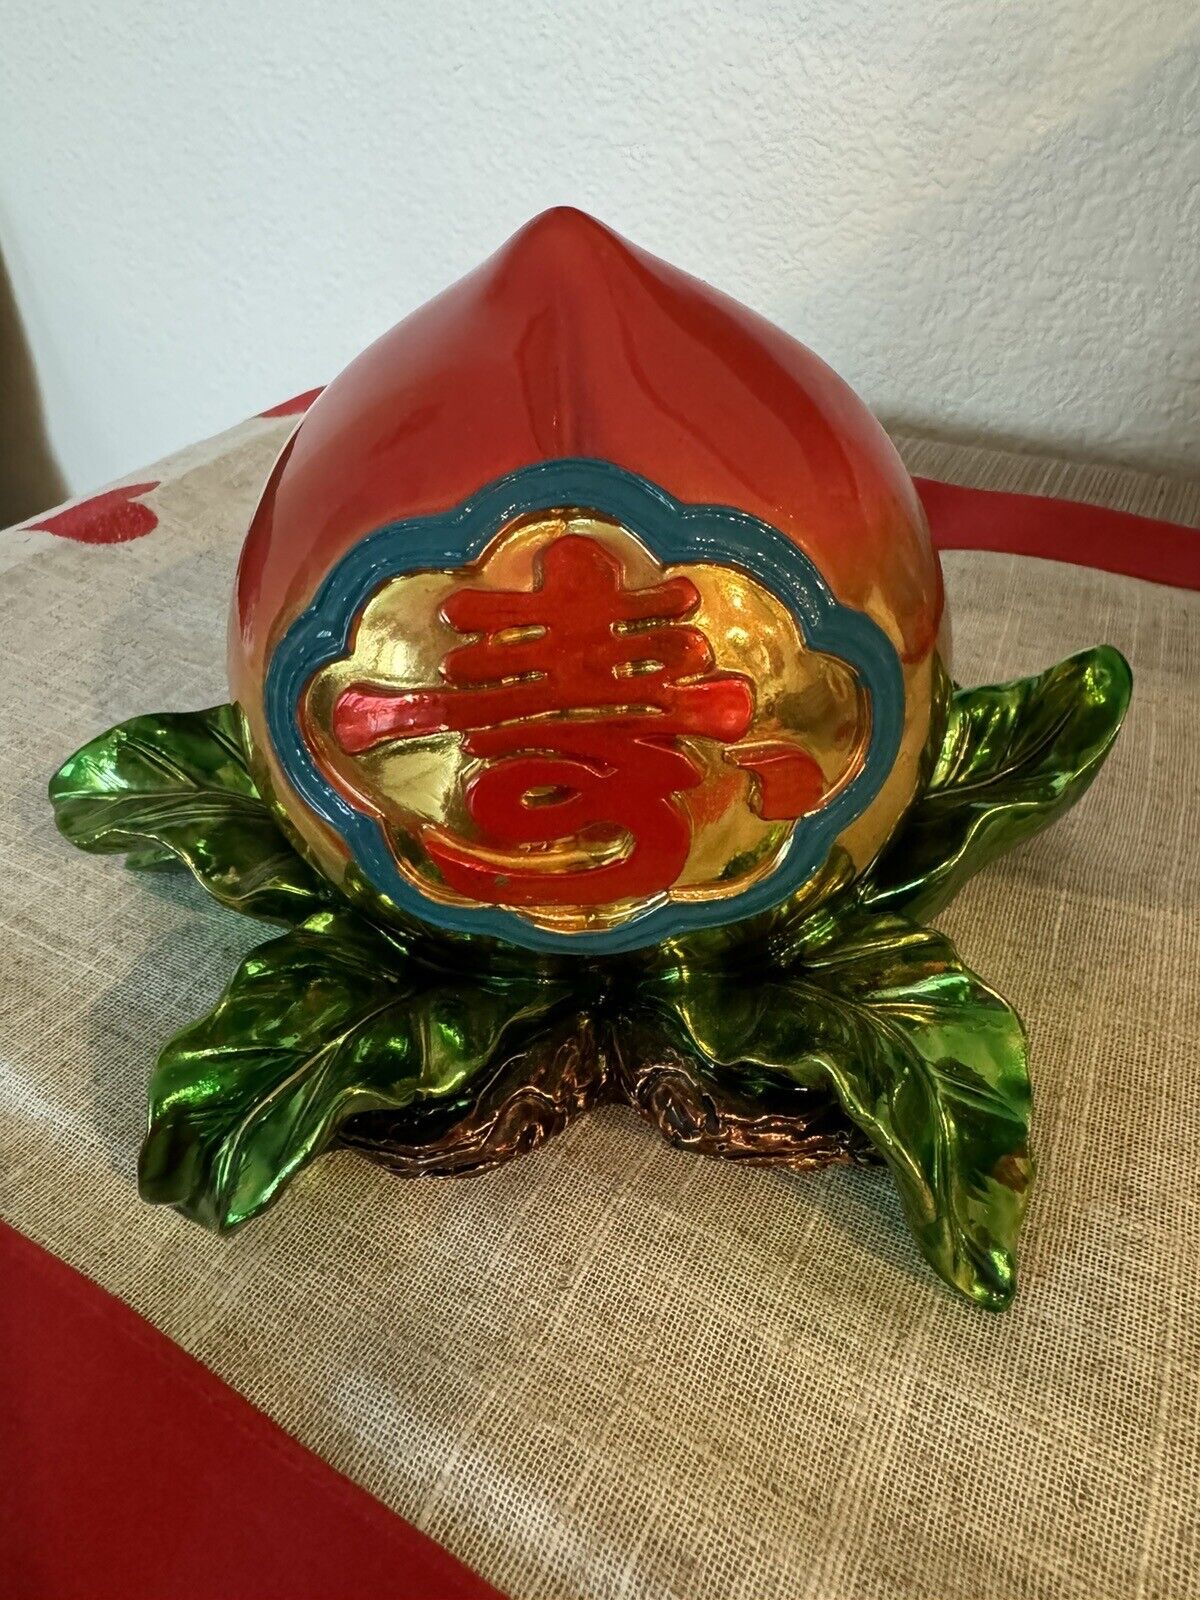 Large Feng Shui Peach Statue for Good Luck and Longevity